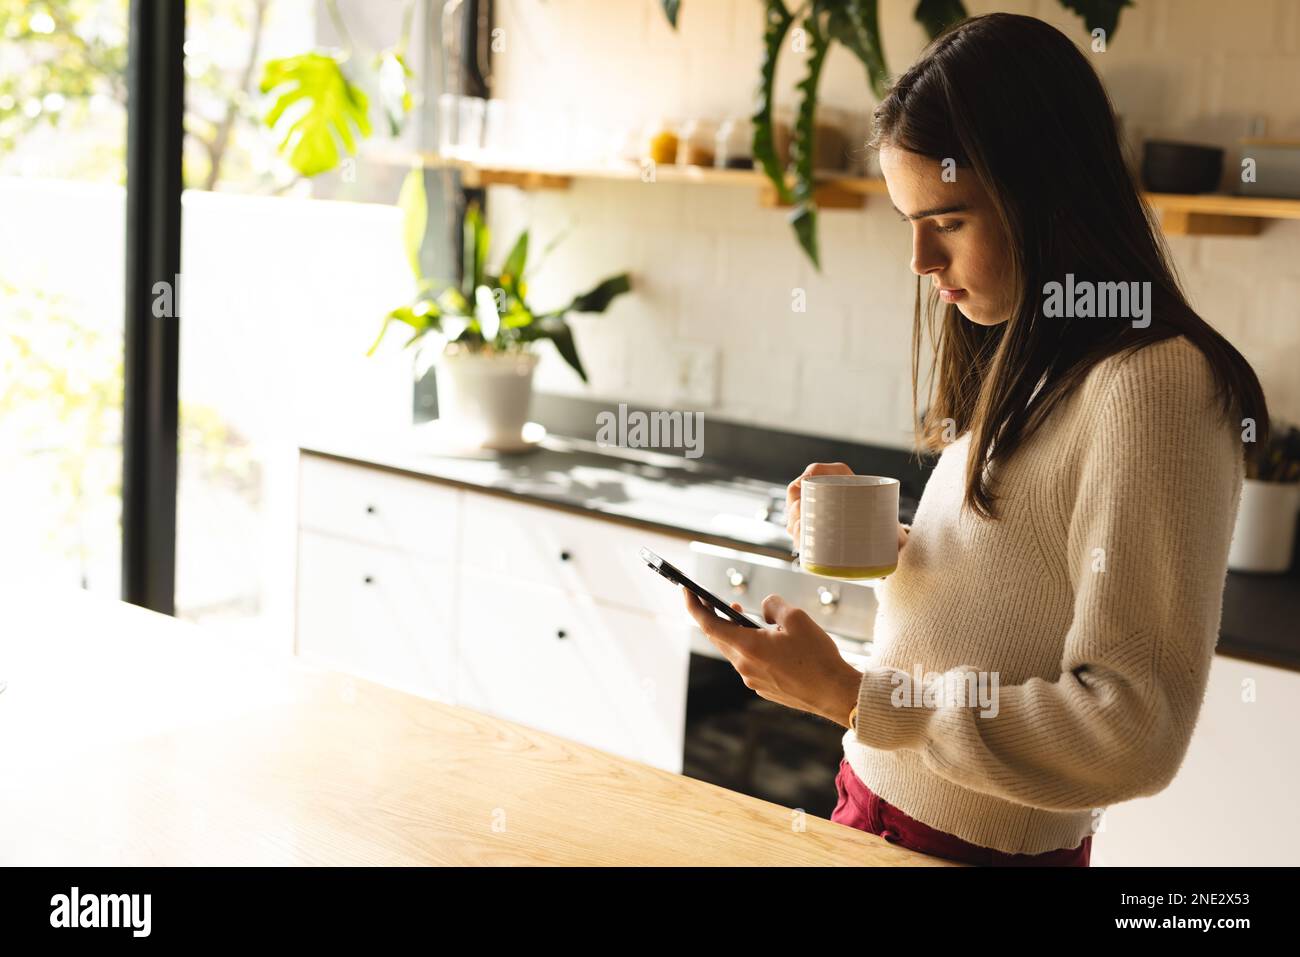 Non-binary trans woman holding a coffee cup using smartphone in the kitchen at home. concept of gender fluidity Stock Photo